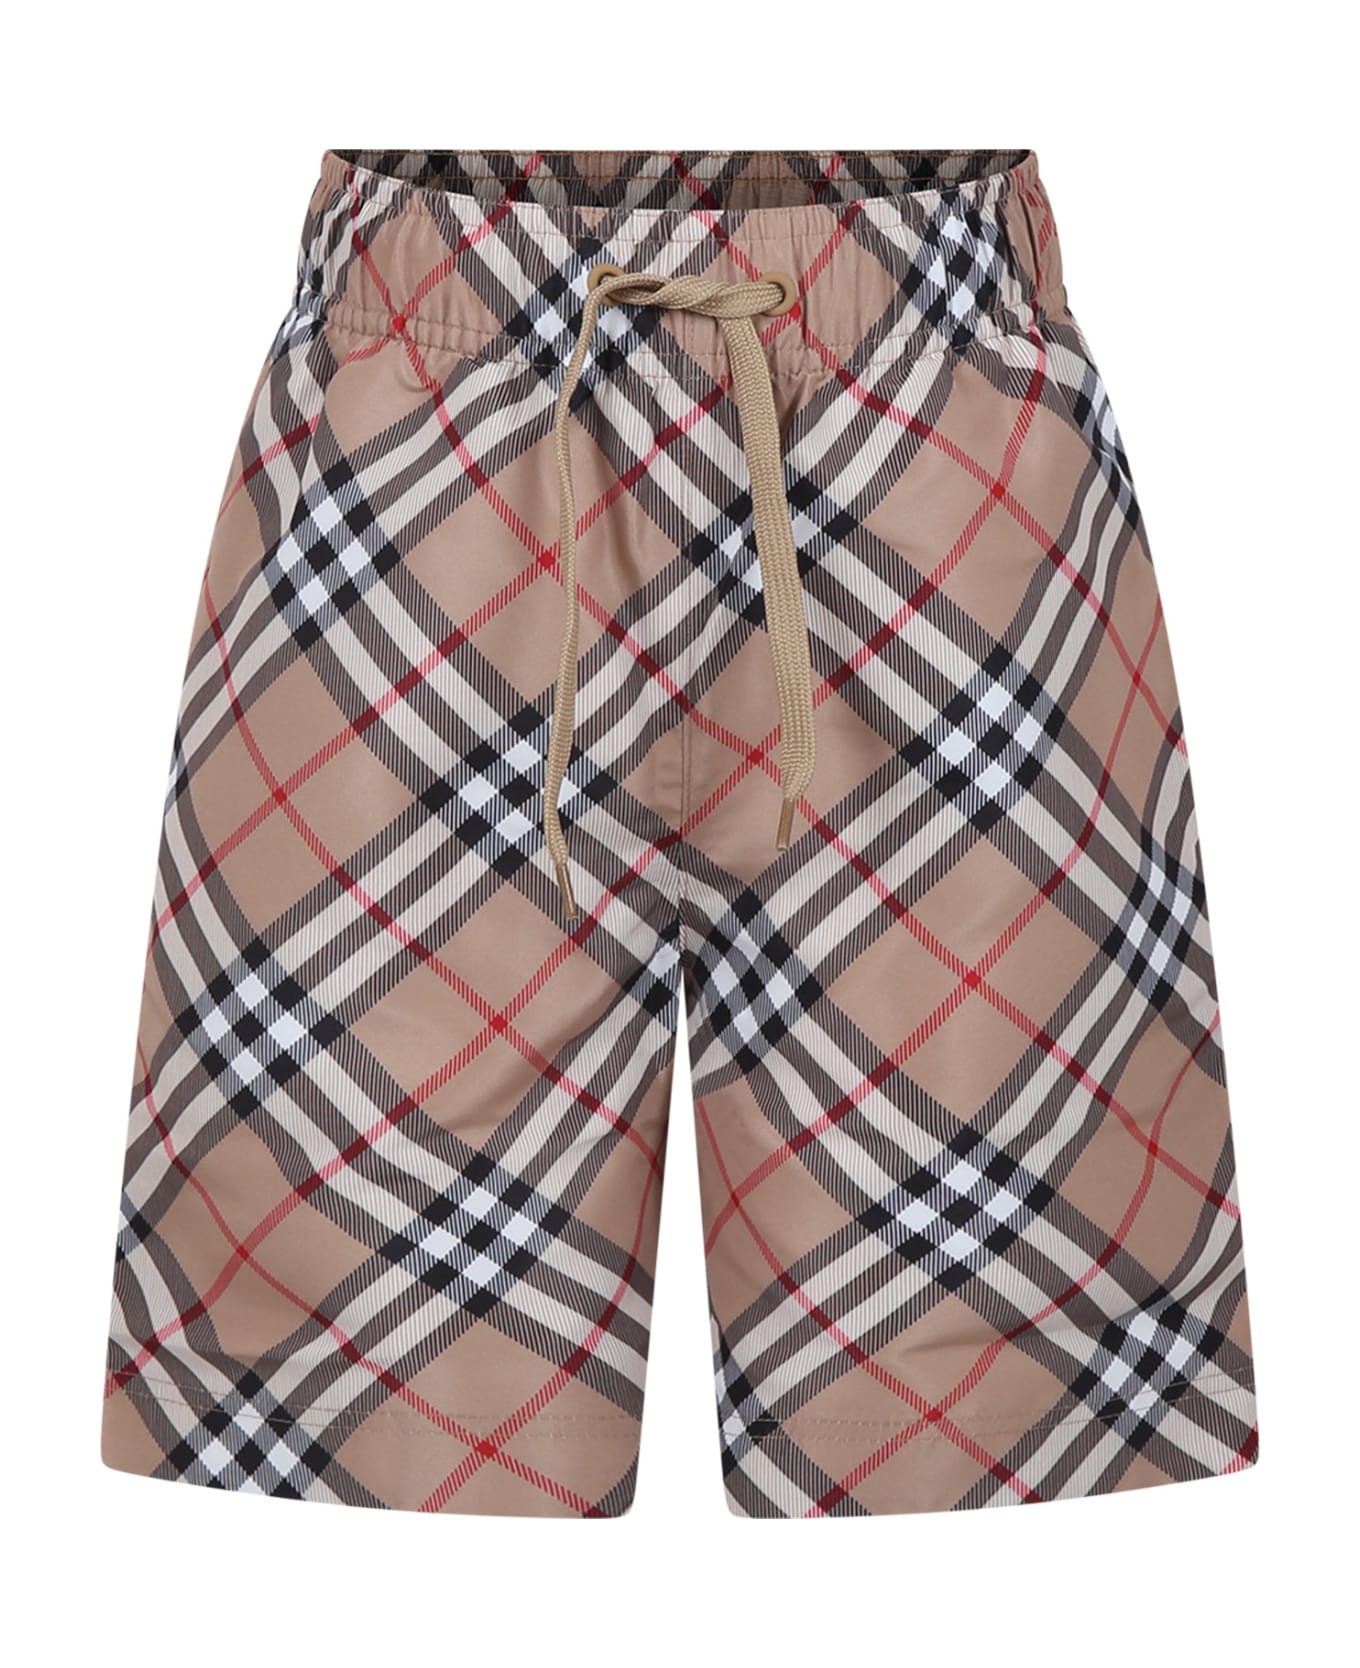 Burberry Beige Swimsuit For Boy With Vintage Check - Beige